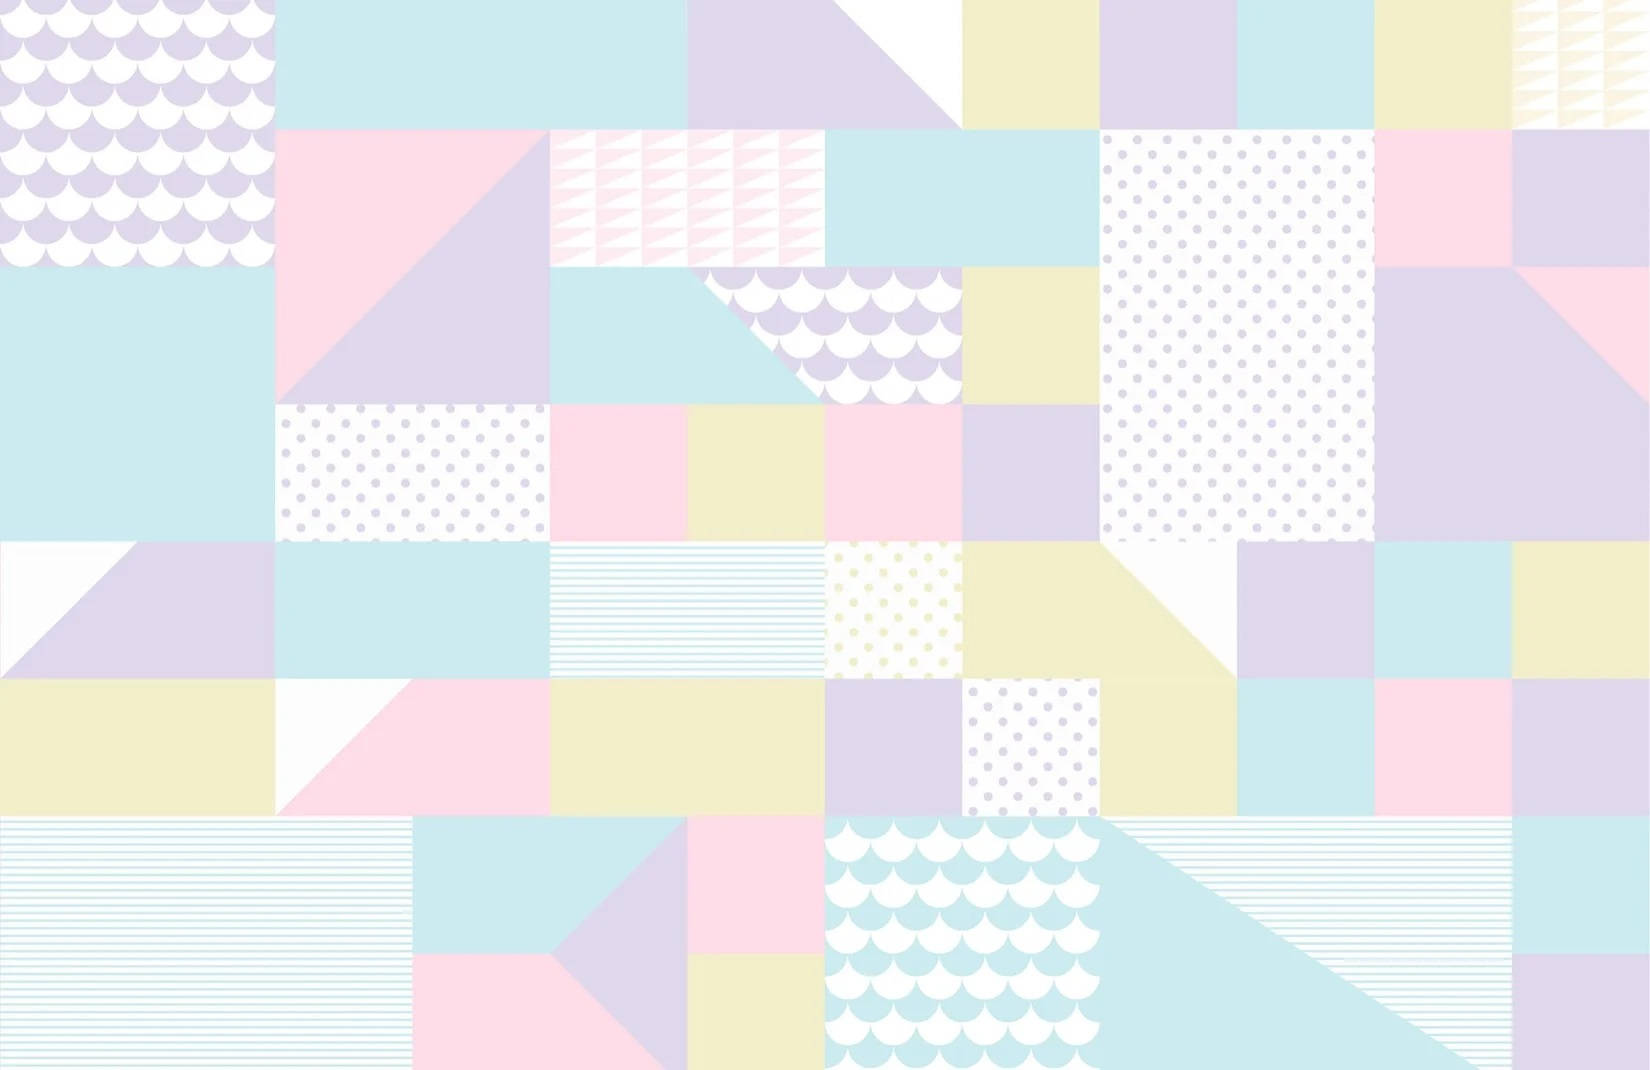 Captivating Artistry In Geometric Abstract Pastel Colors